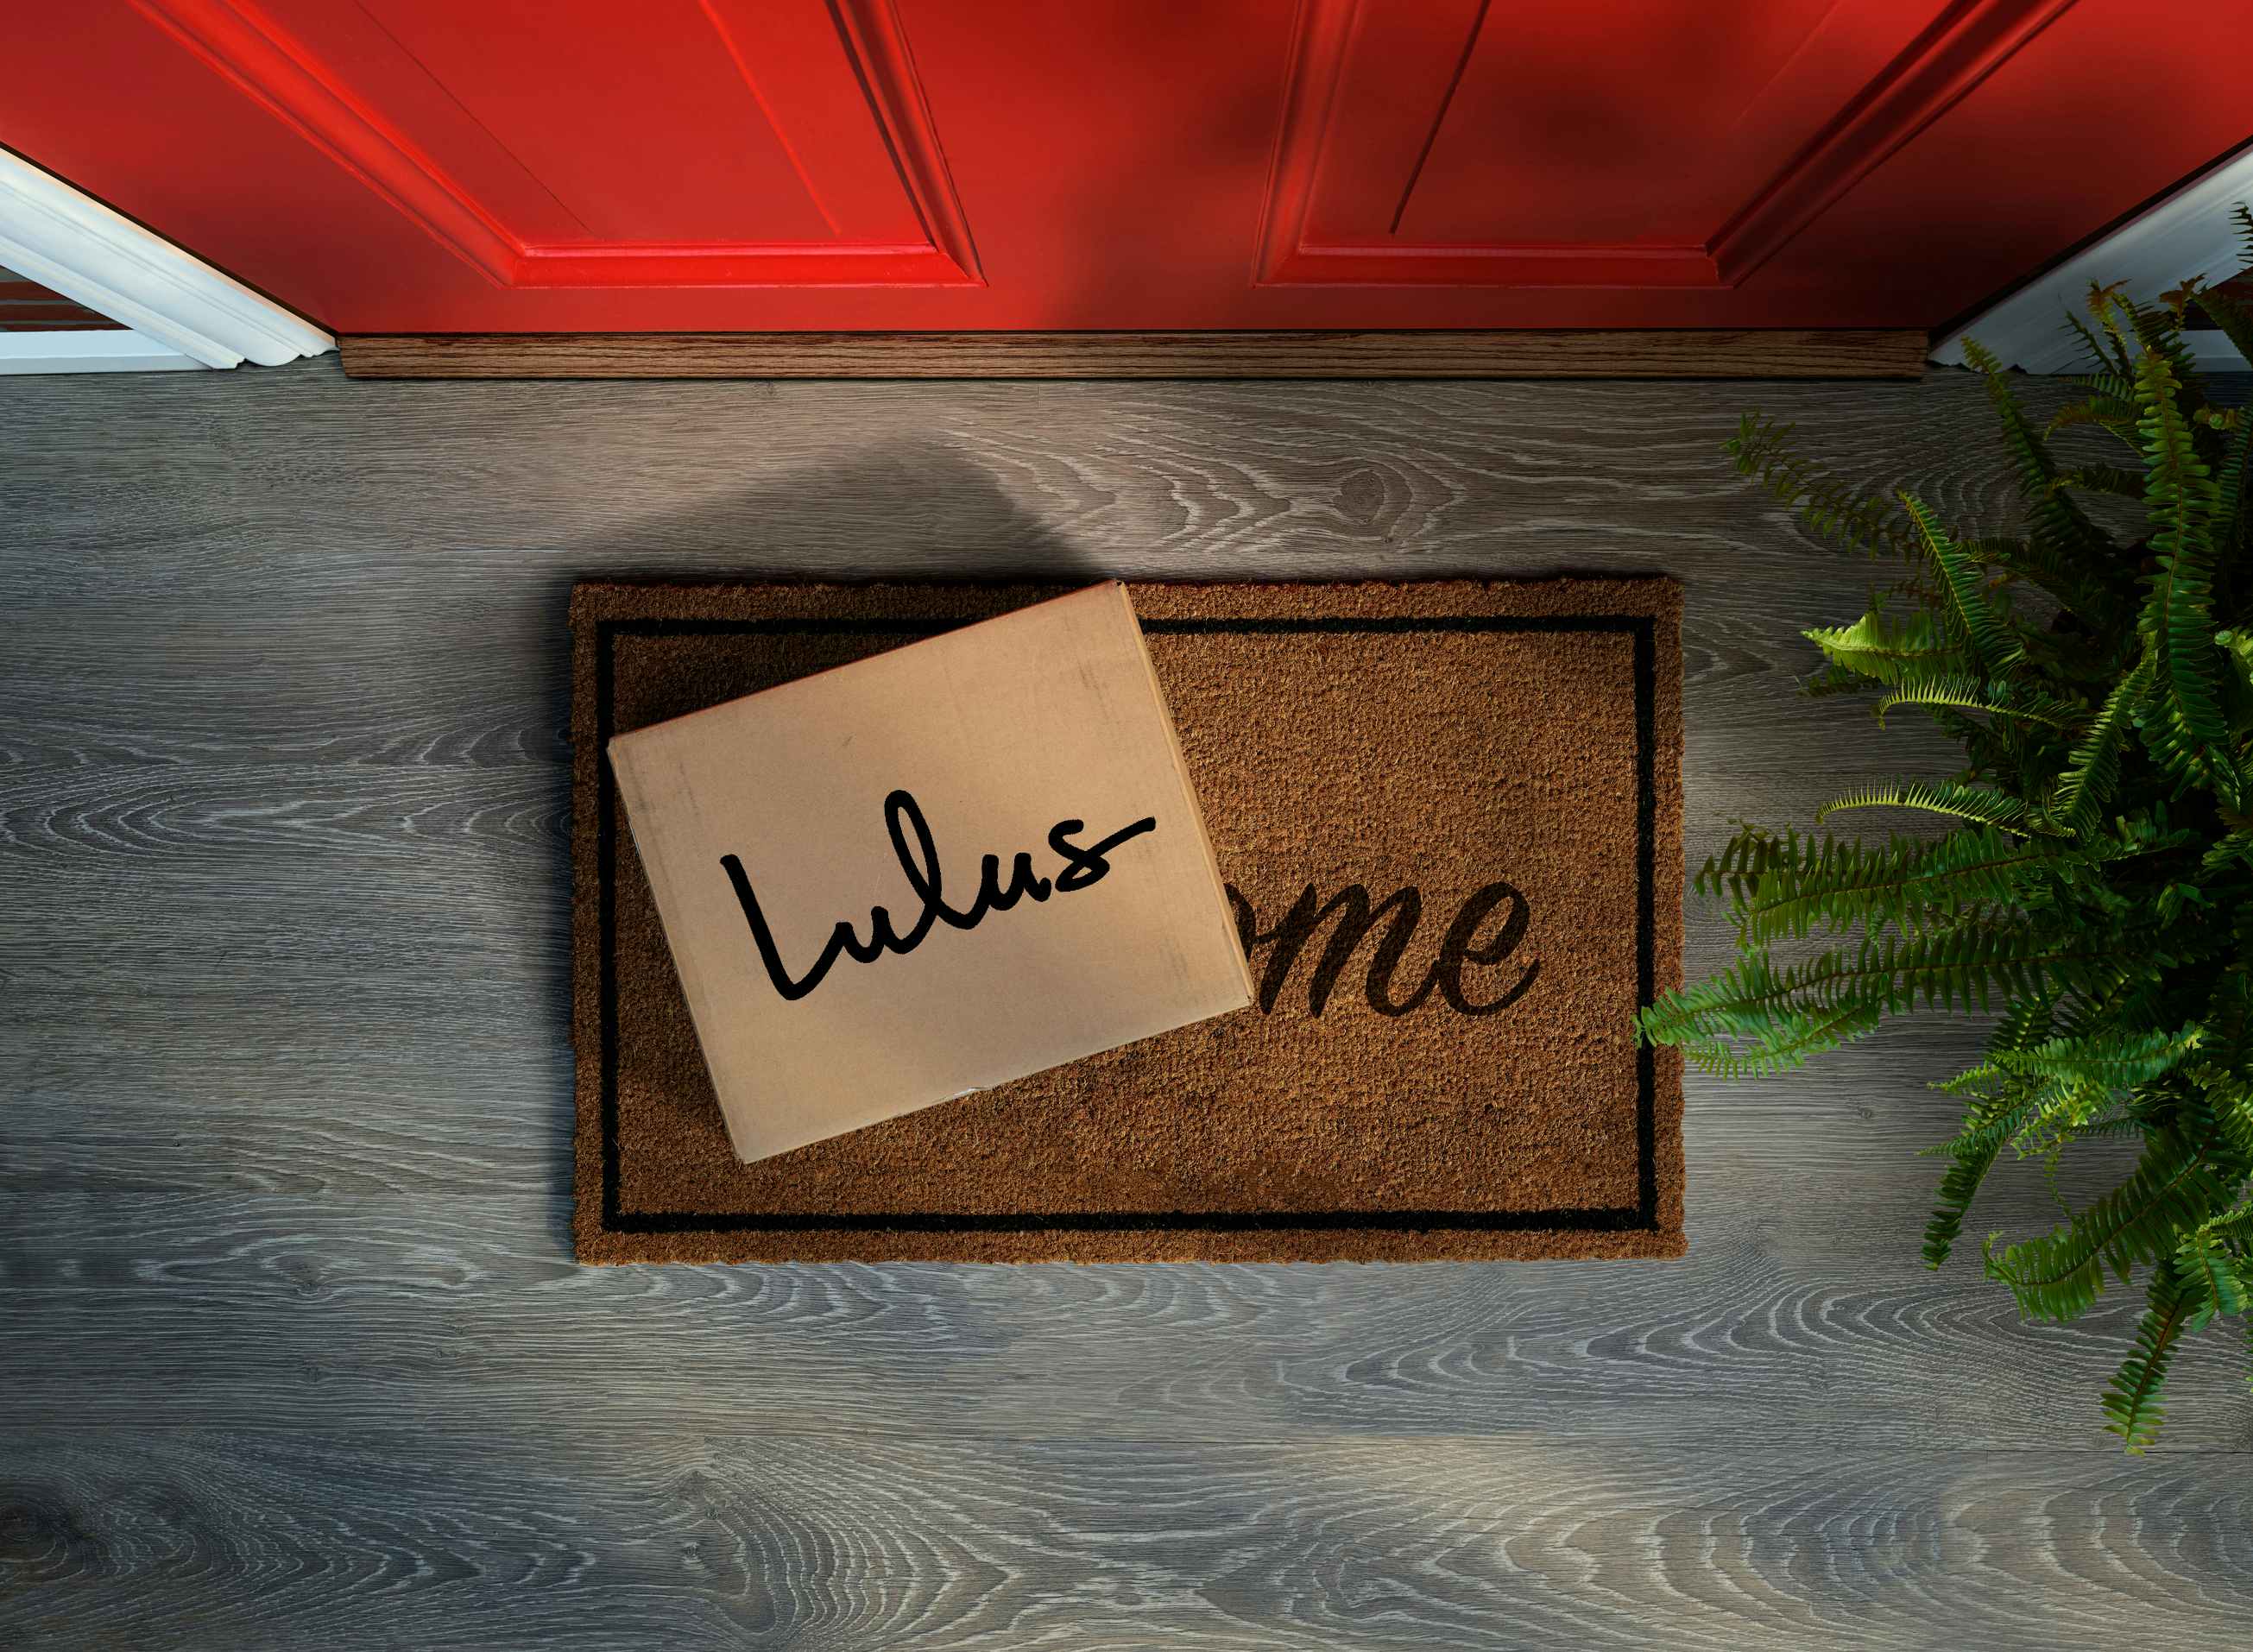 A Lulus package on a porch outside someone's front door